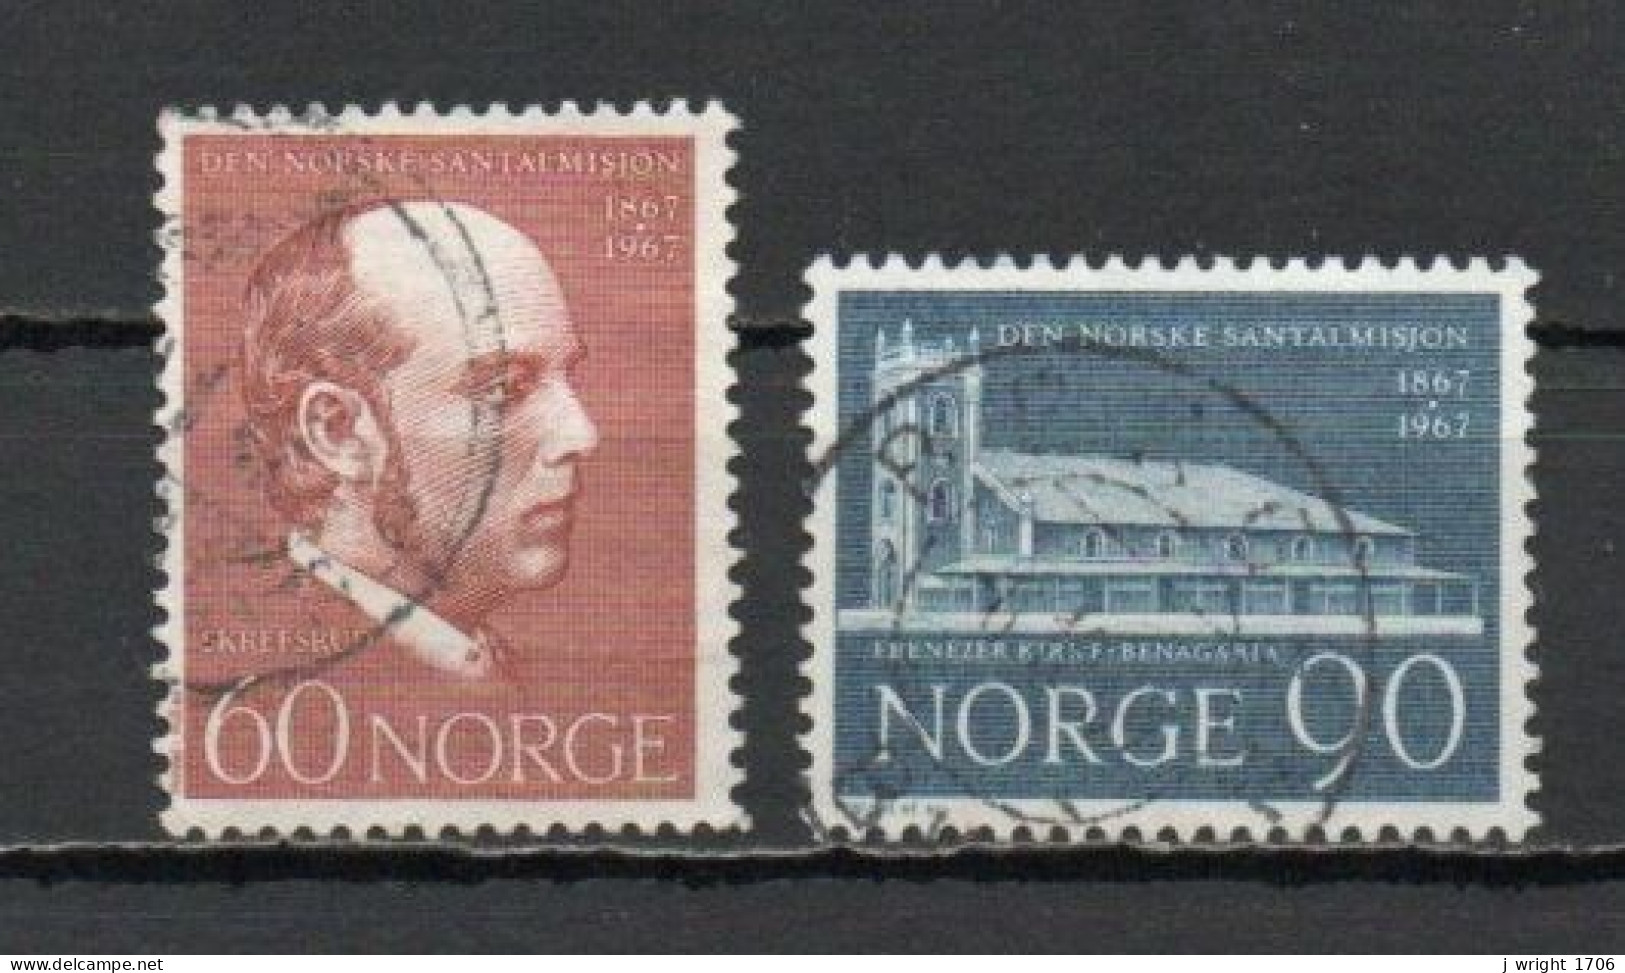 Norway, 1967, Santal Mission Centenary, Set, USED - Used Stamps